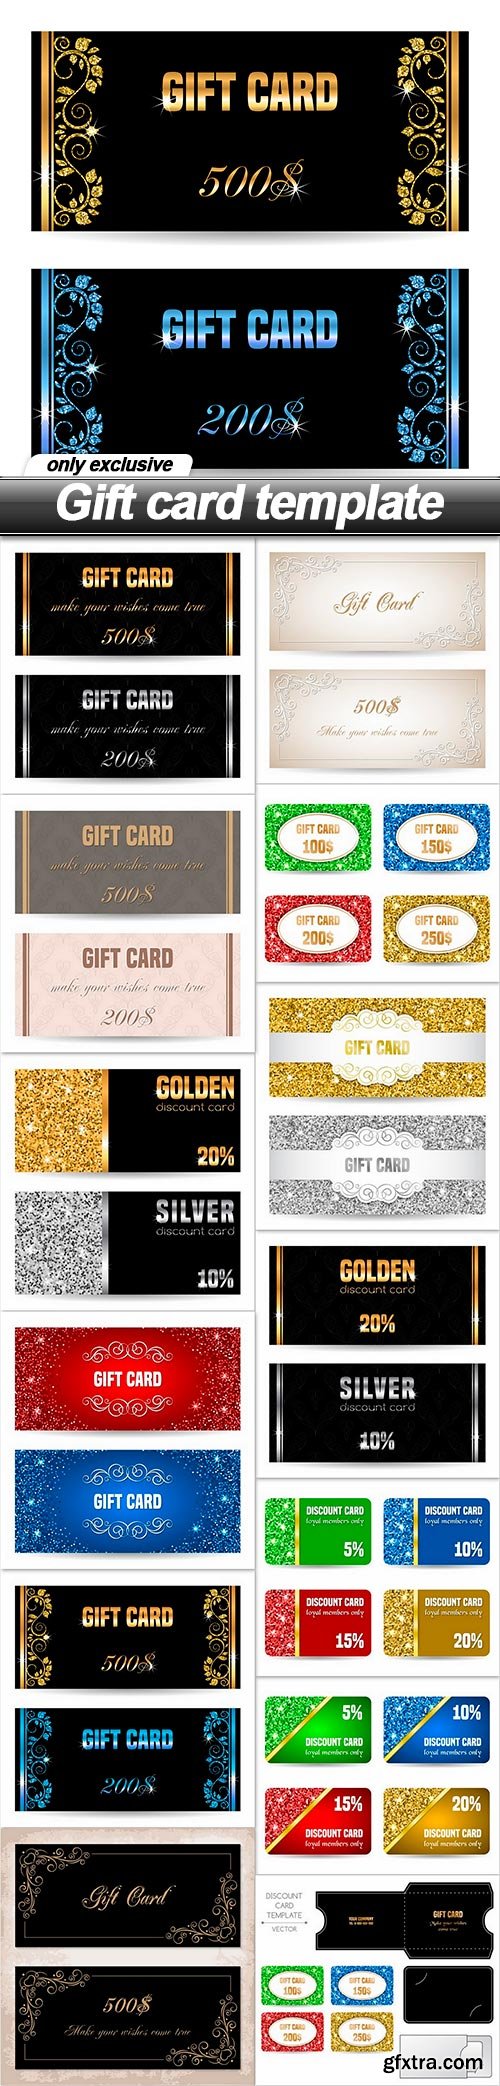 Gift card template - 13 EPS